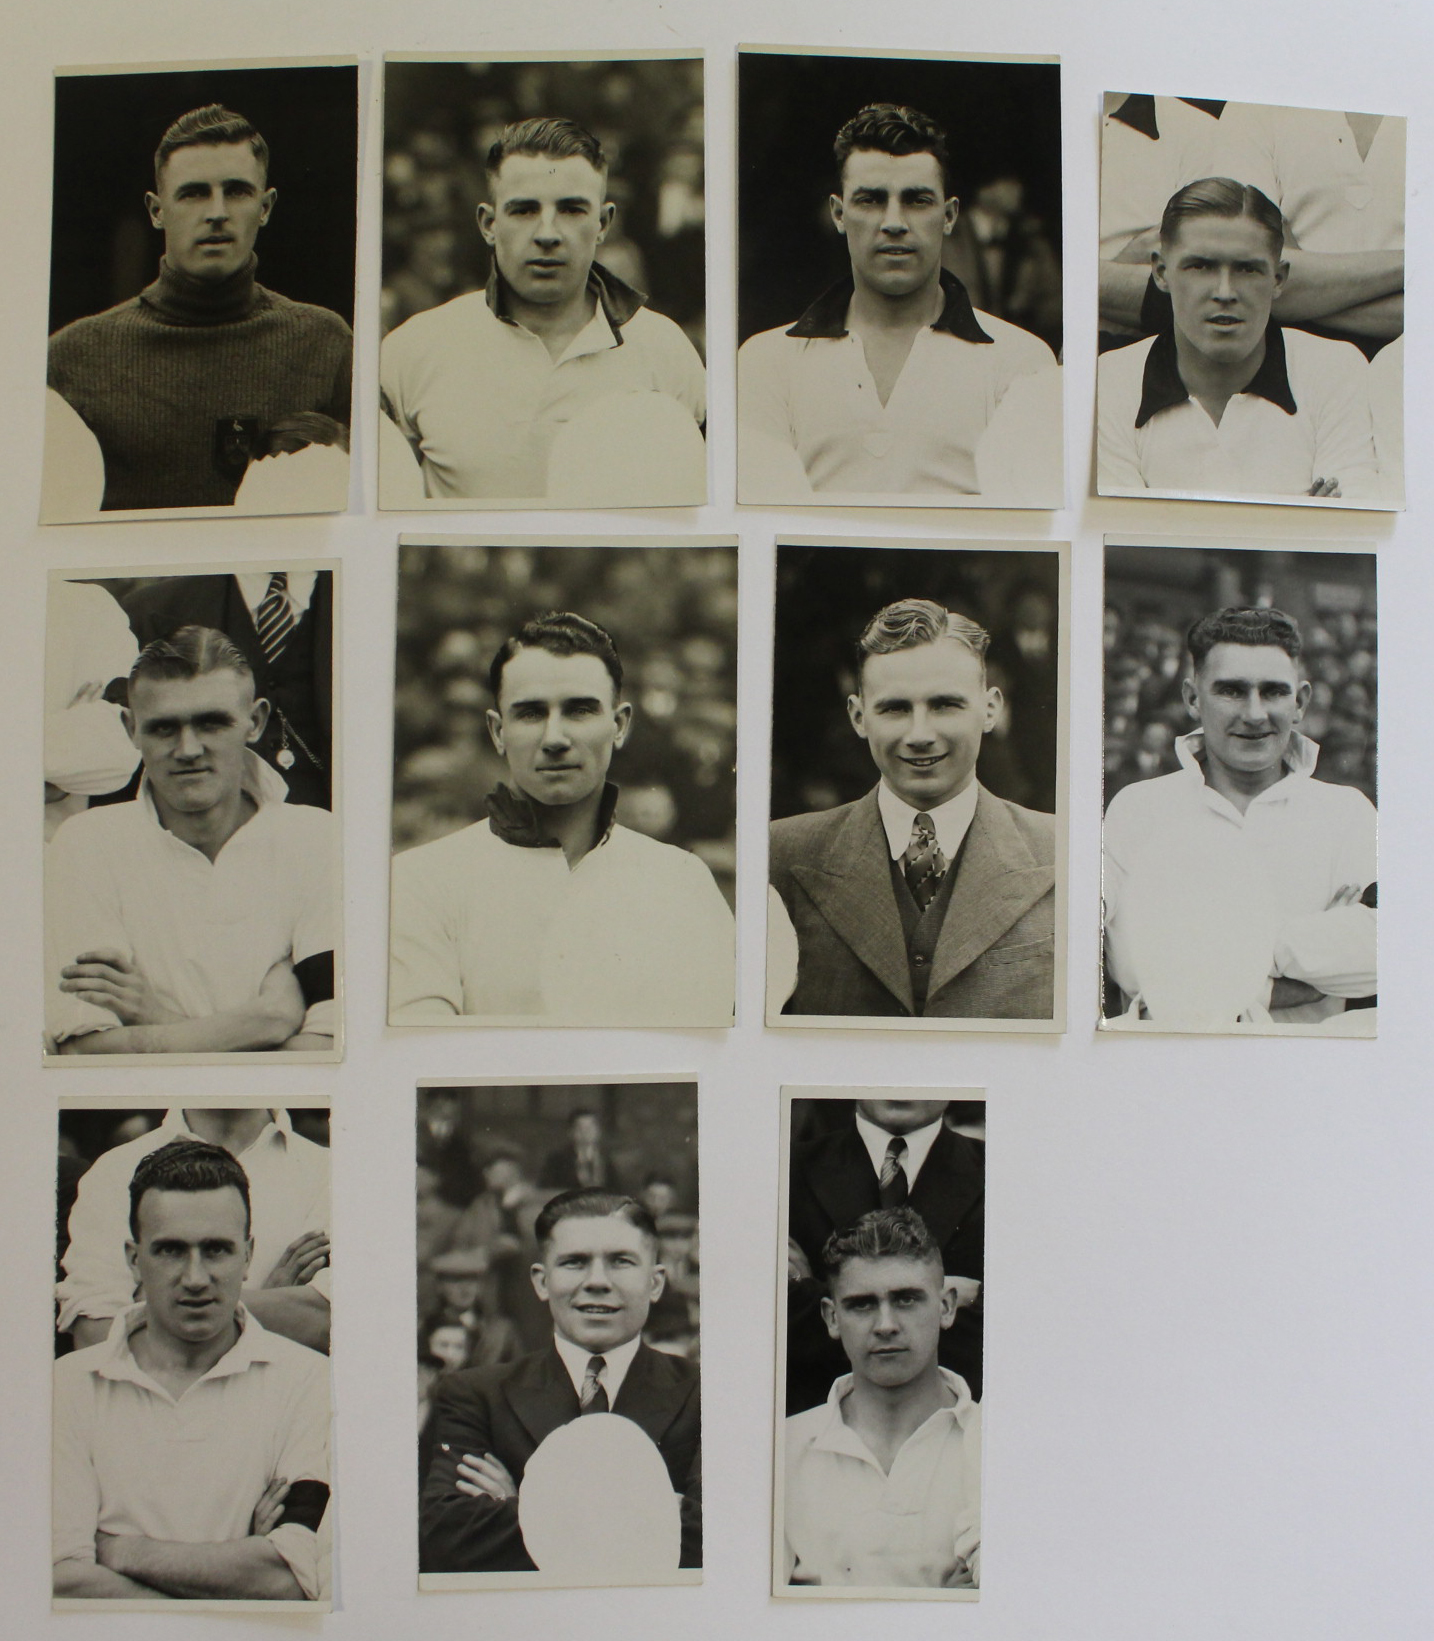 Burnley - rare, black and white cards, mostly postcard size, issued by Wilkes of West Bromwich who